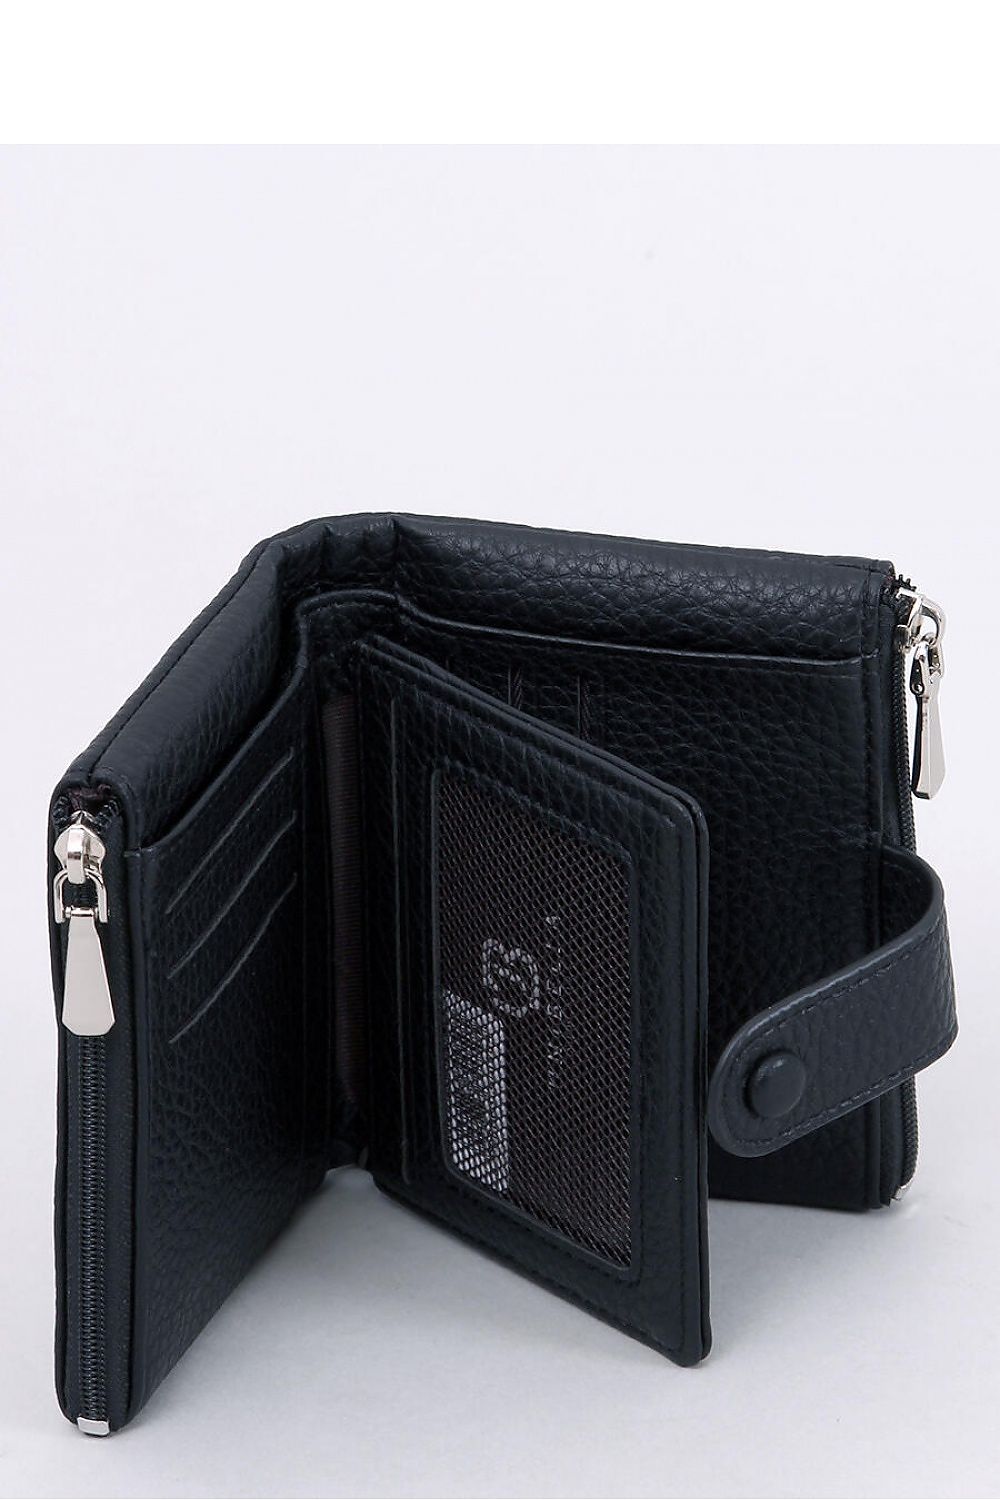 Women`s wallet - M&H FashionWomen`s walletM&H FashionM&H Fashion189662_1103920one-size-fits-allwallet InelloM&H FashionM&H FashionClassic women's wallet. This small but practical model will definitely meet your expectations.... It will also be perfect as a gift : ) Inside there are numerous comWomen`s wallet